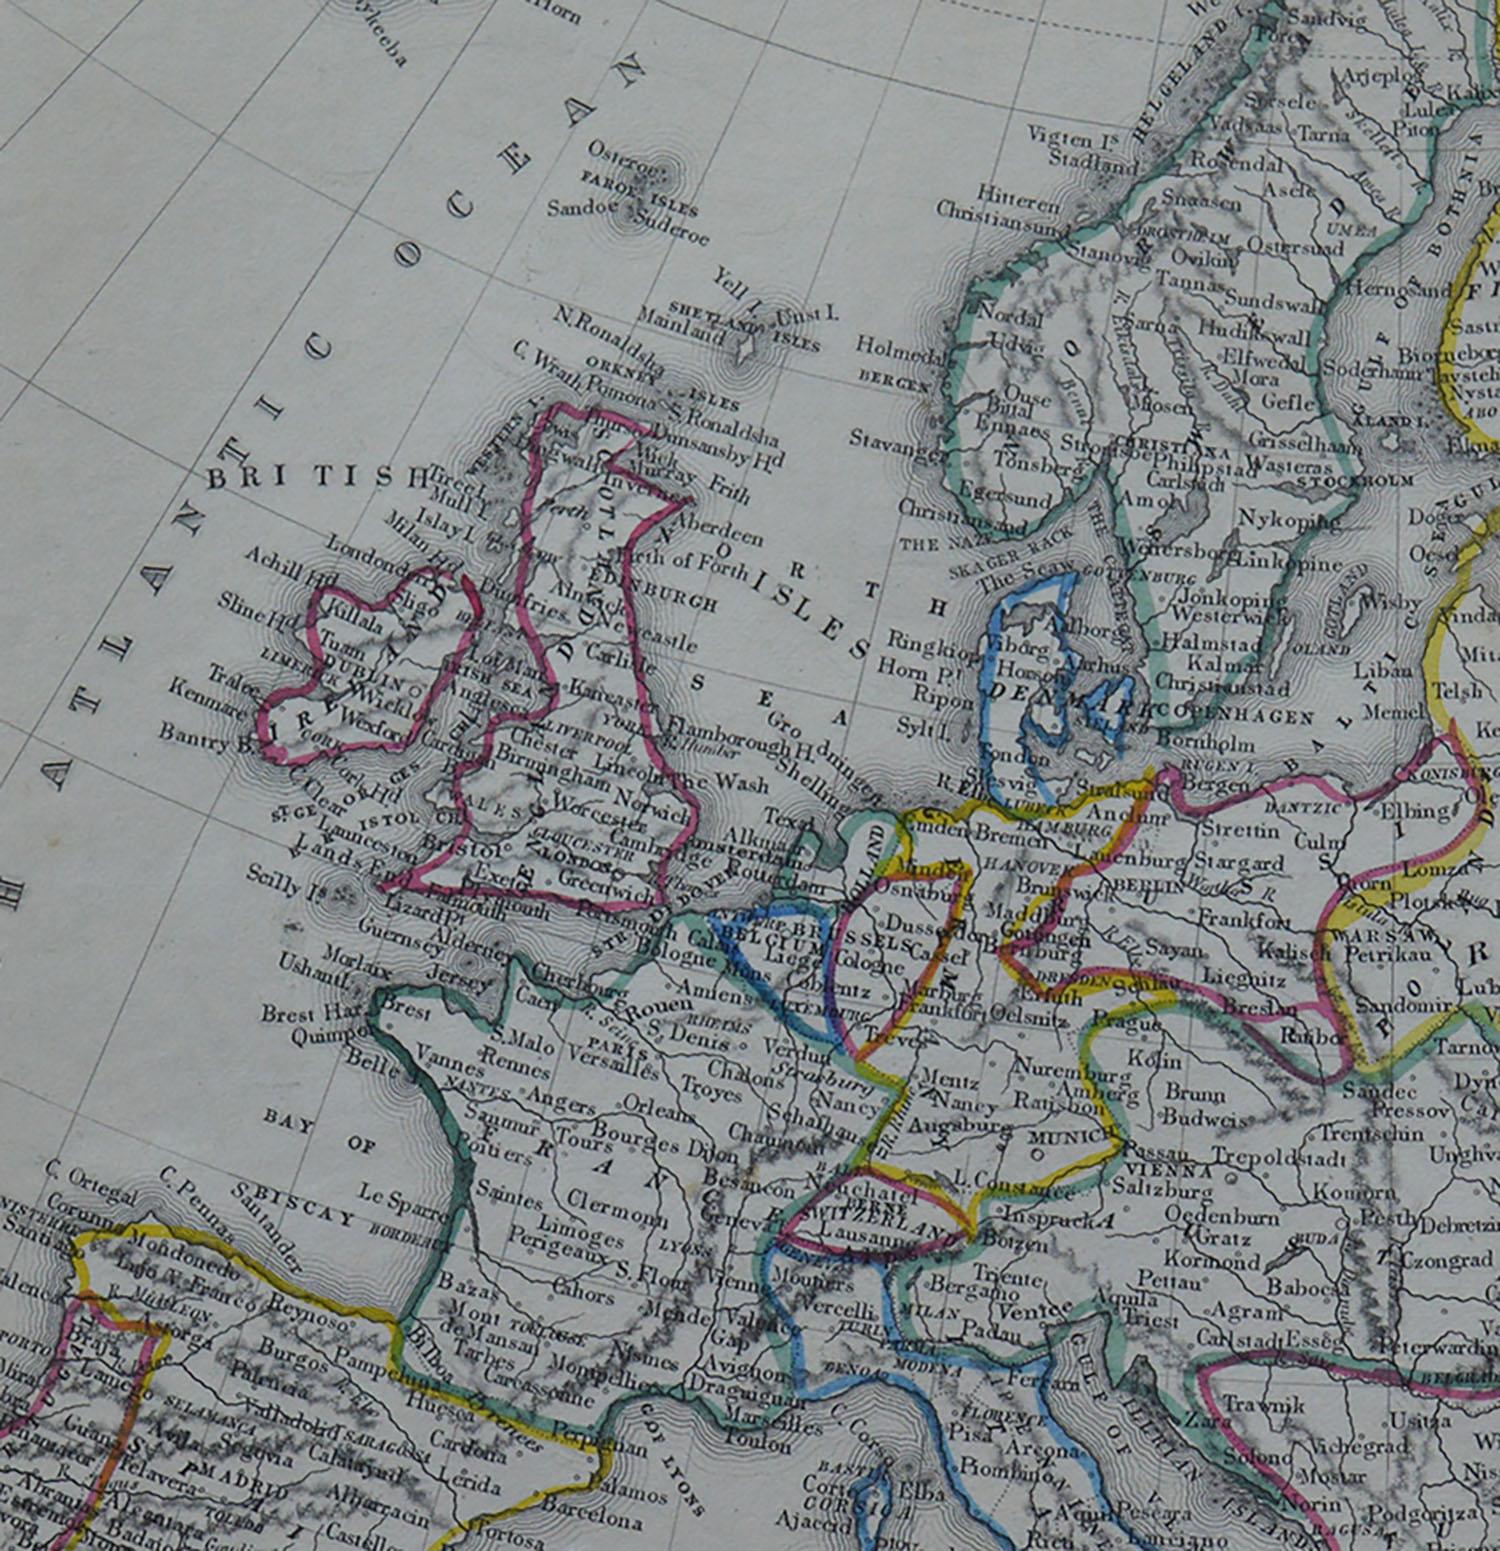 Other Original Antique Map of Europe by Becker, circa 1840